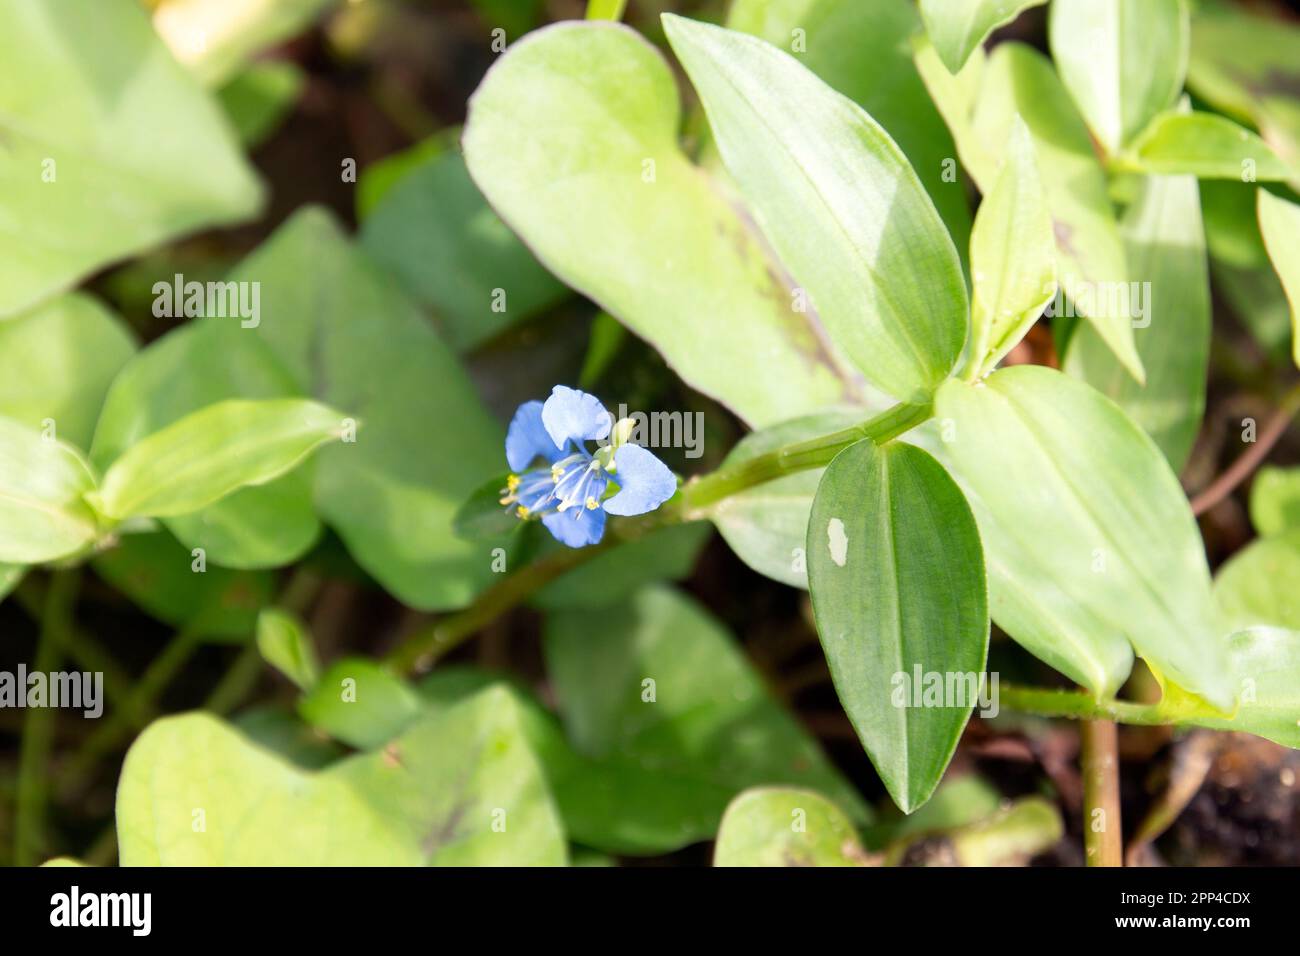 background, flower, summer, nature, leaf, forest, butterfly, floral, beauty, garden, green, blue, leaves, crown, agriculture, plant, tropical, park, Stock Photo